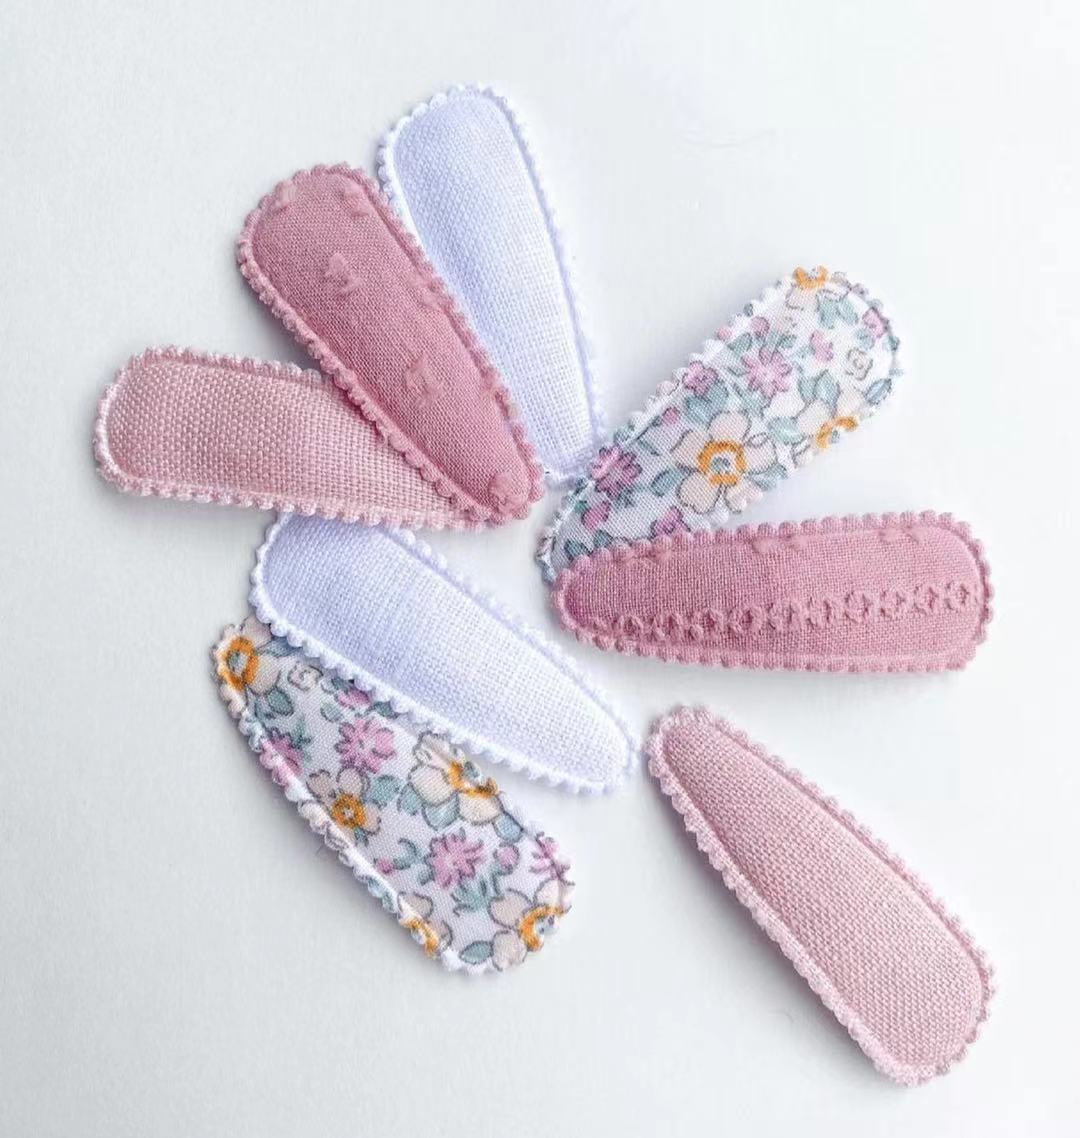 FABRIC SNAP CLIPS - PINK EMBROIDERY & AUDREY FLORAL